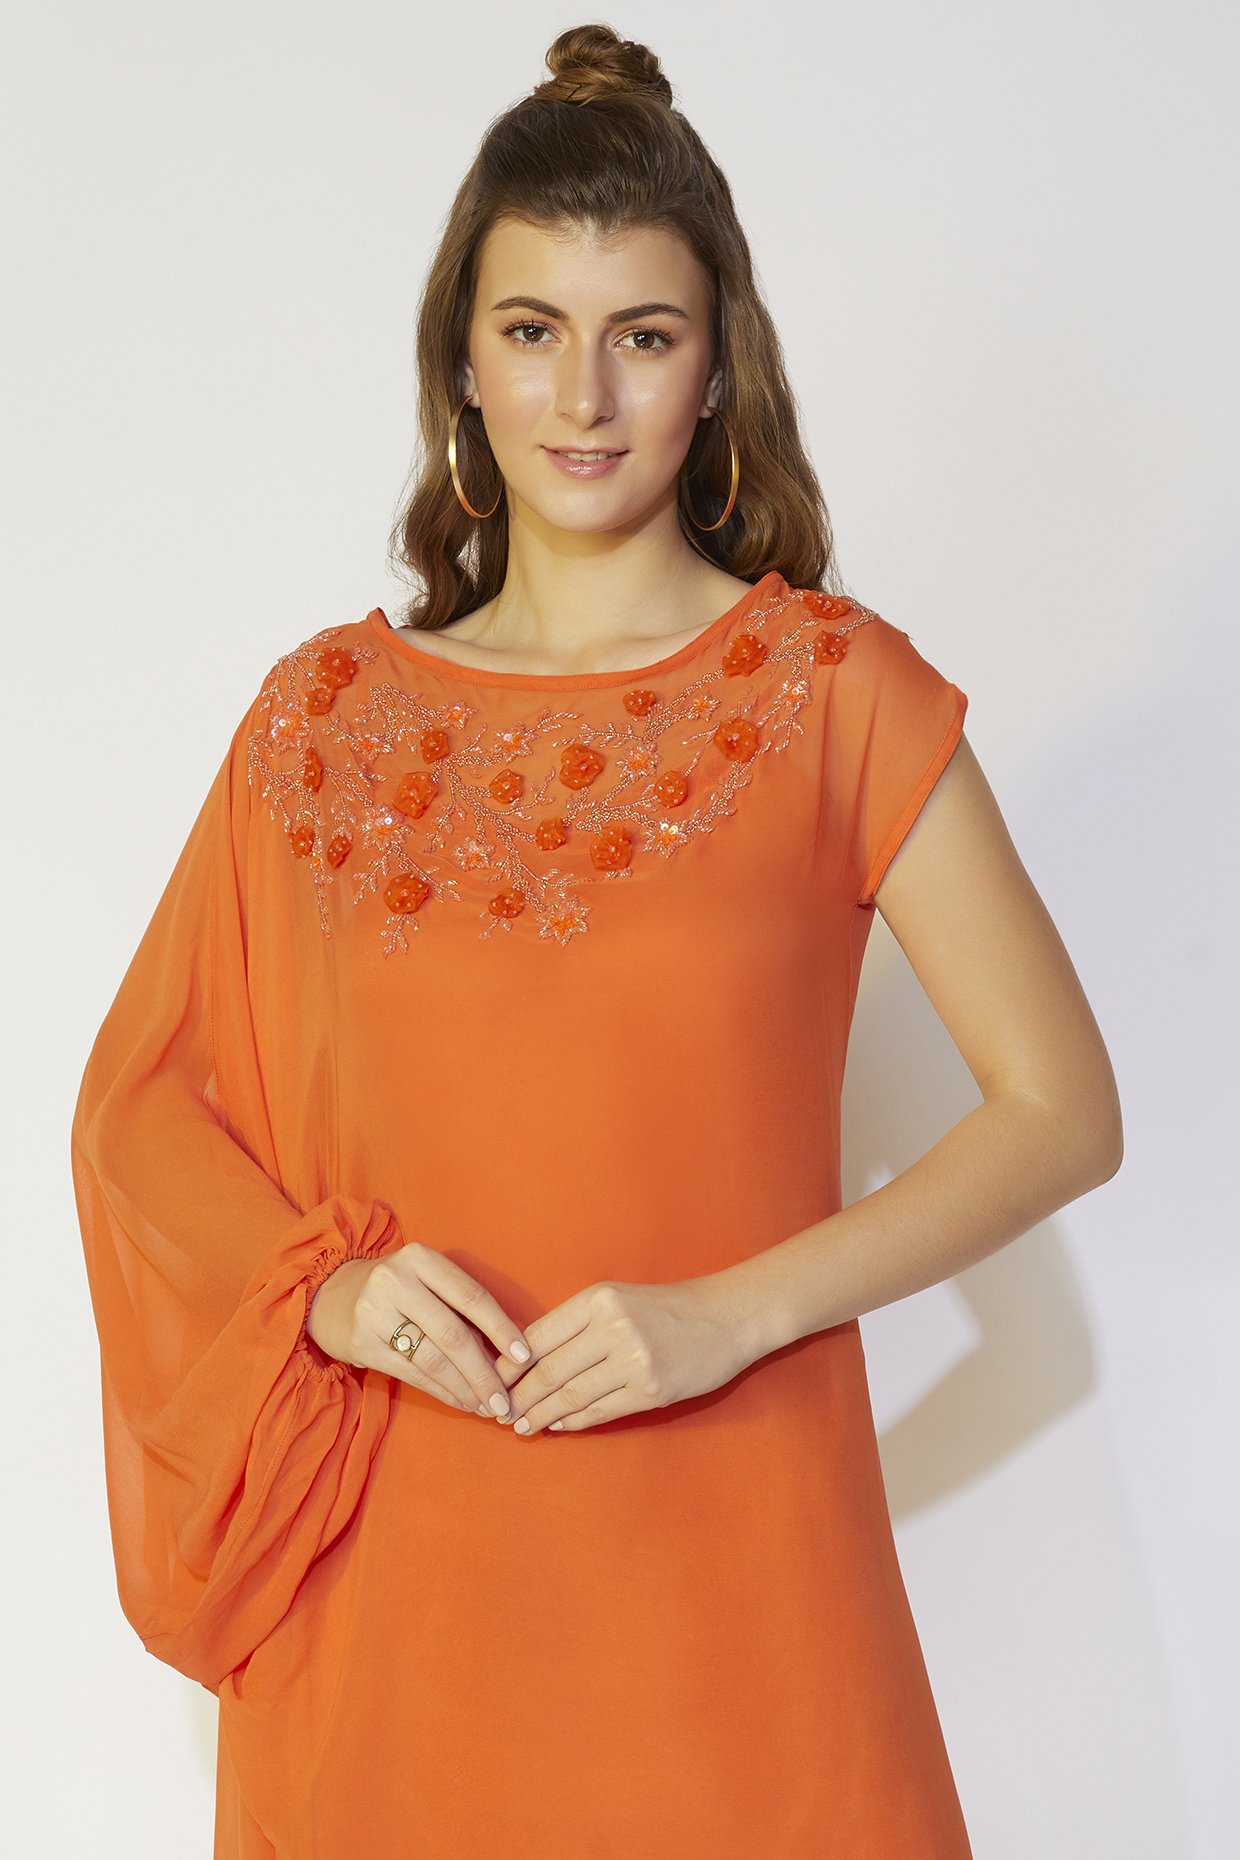 Buy Orange Dress- Chanderi (70% Cotton And 30% Silk) Embroidered 3d Florals  For Women by The White Tree Studio Online at Aza Fashions.